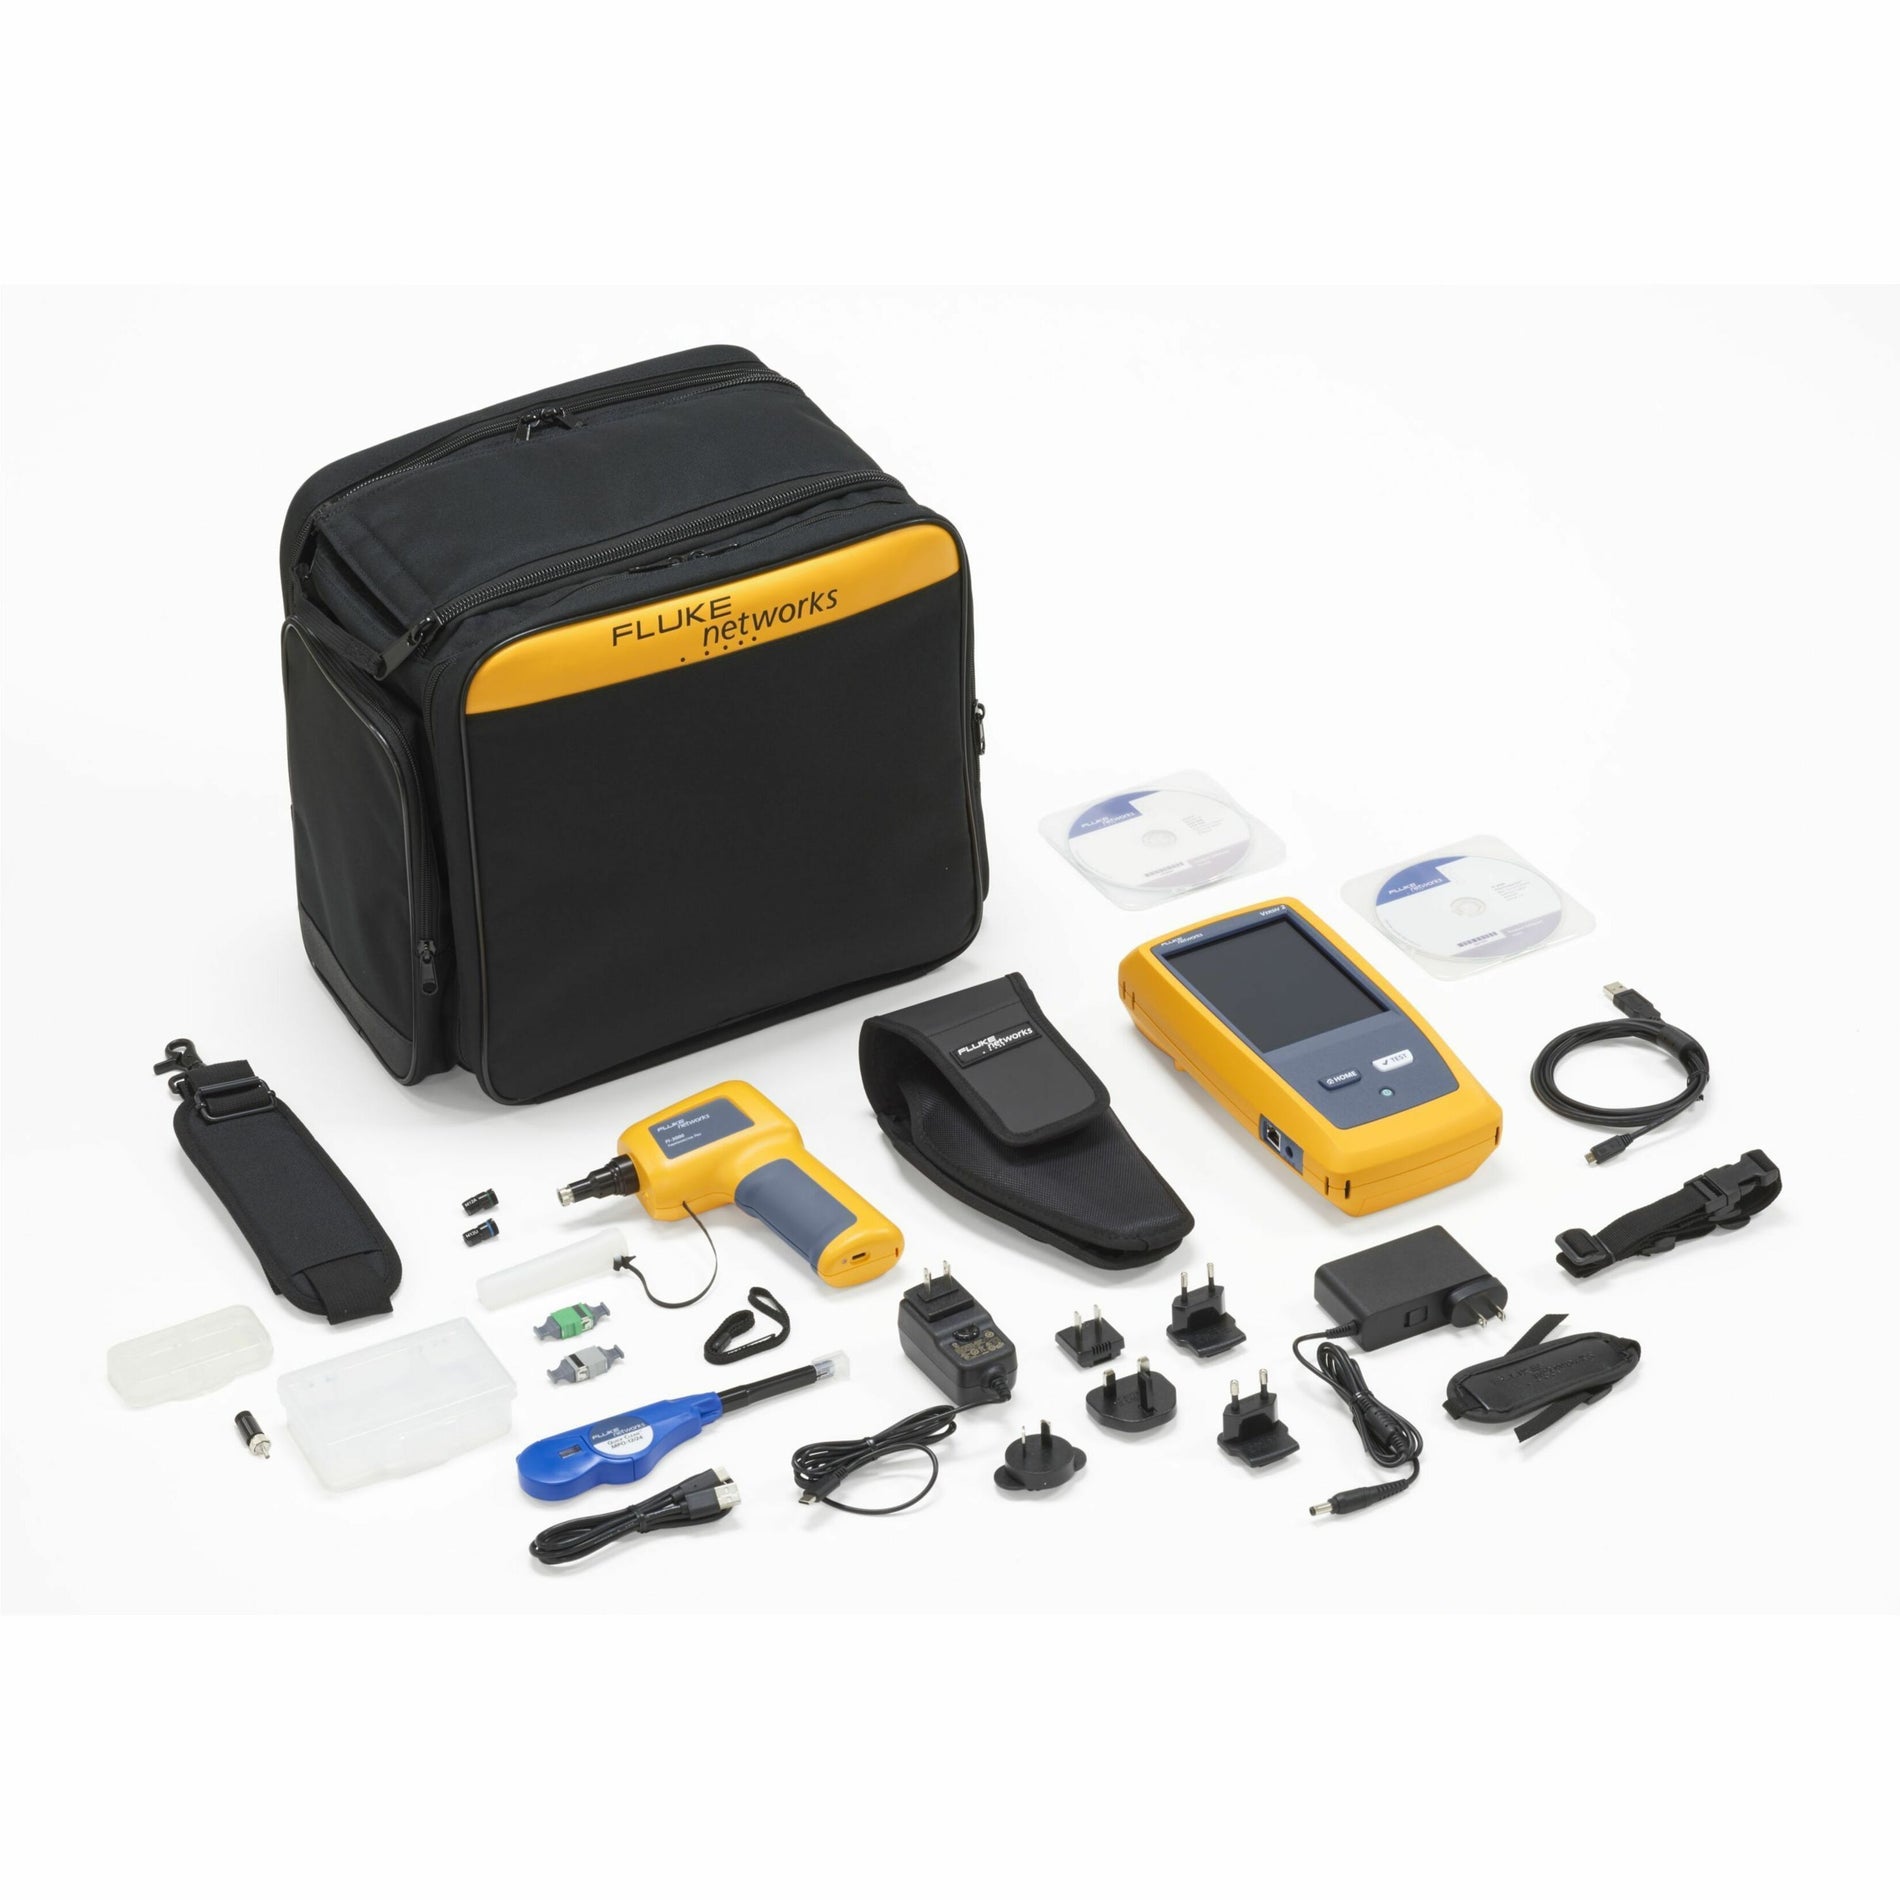 Fluke Networks FI2-7300 FiberInspector Pro Cable Analyzer, Fiber Optic and Twisted Pair Testing, USB and Wireless LAN